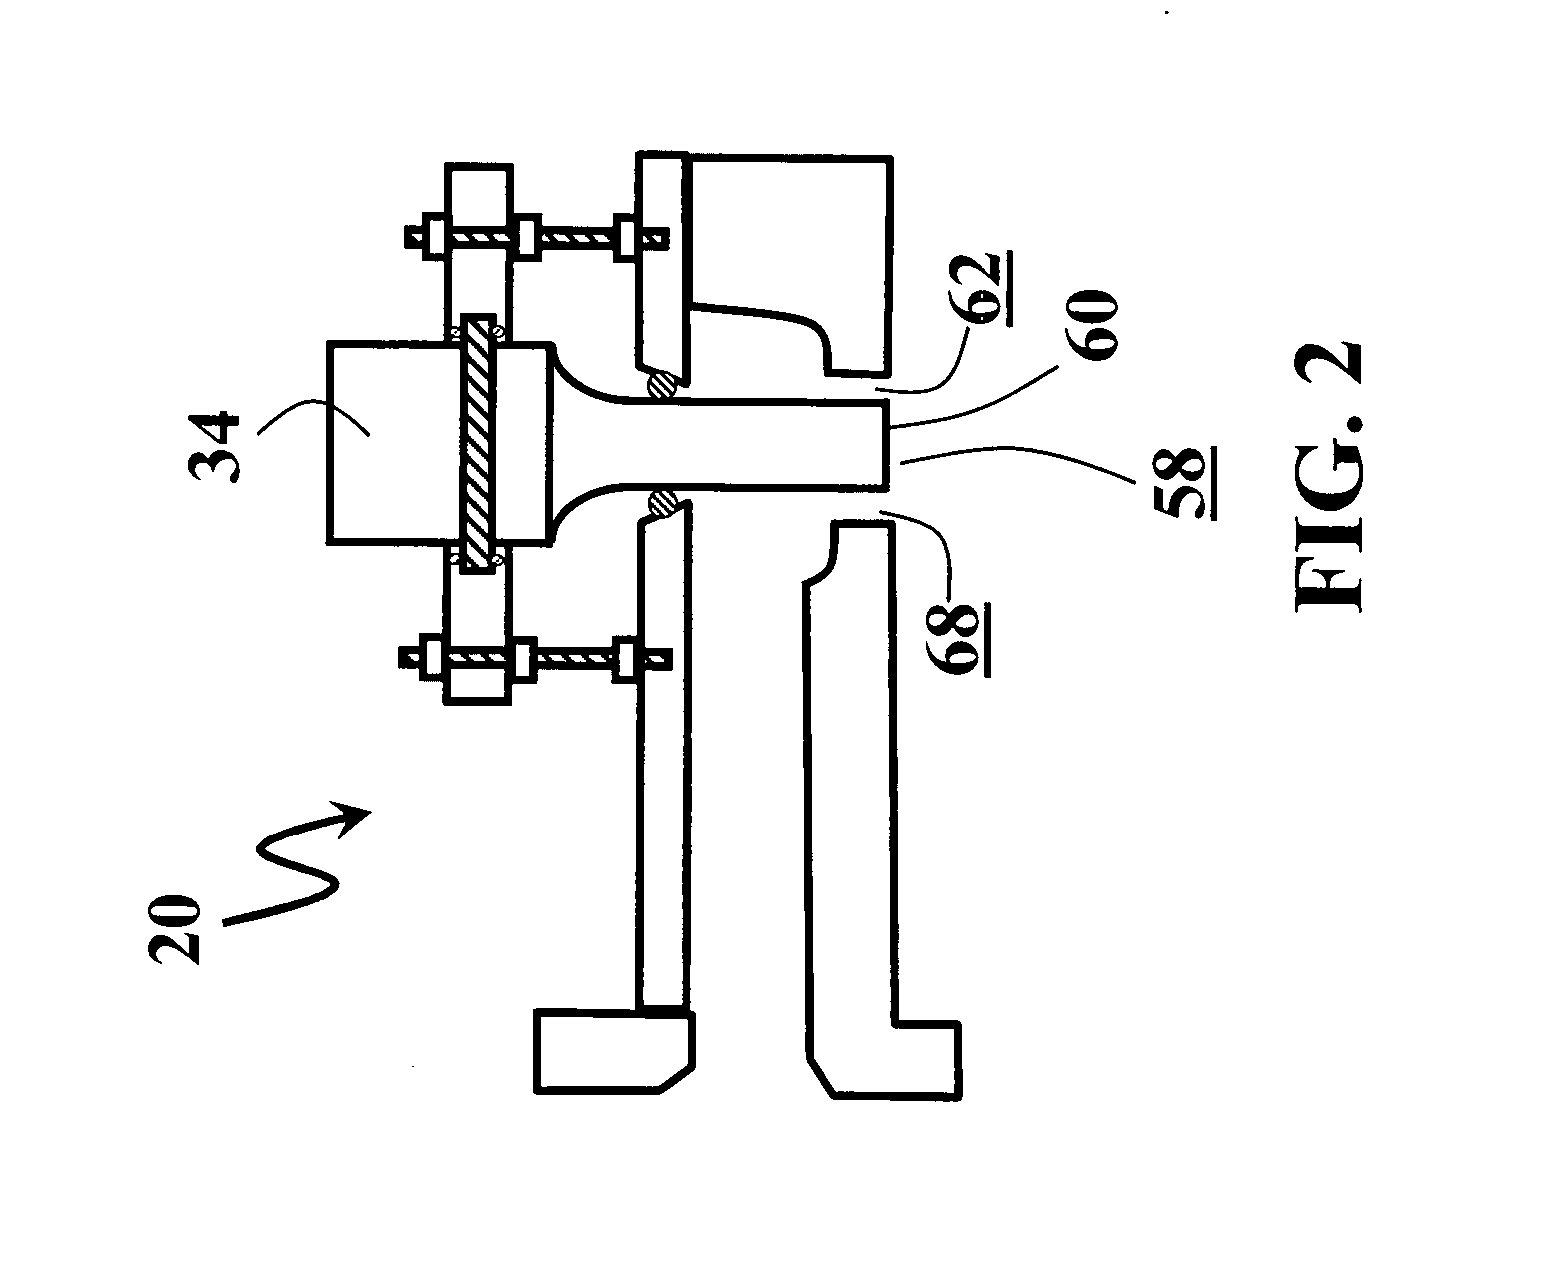 Apparatus, method and product for ultrasonic extrusion of a flowable substrate